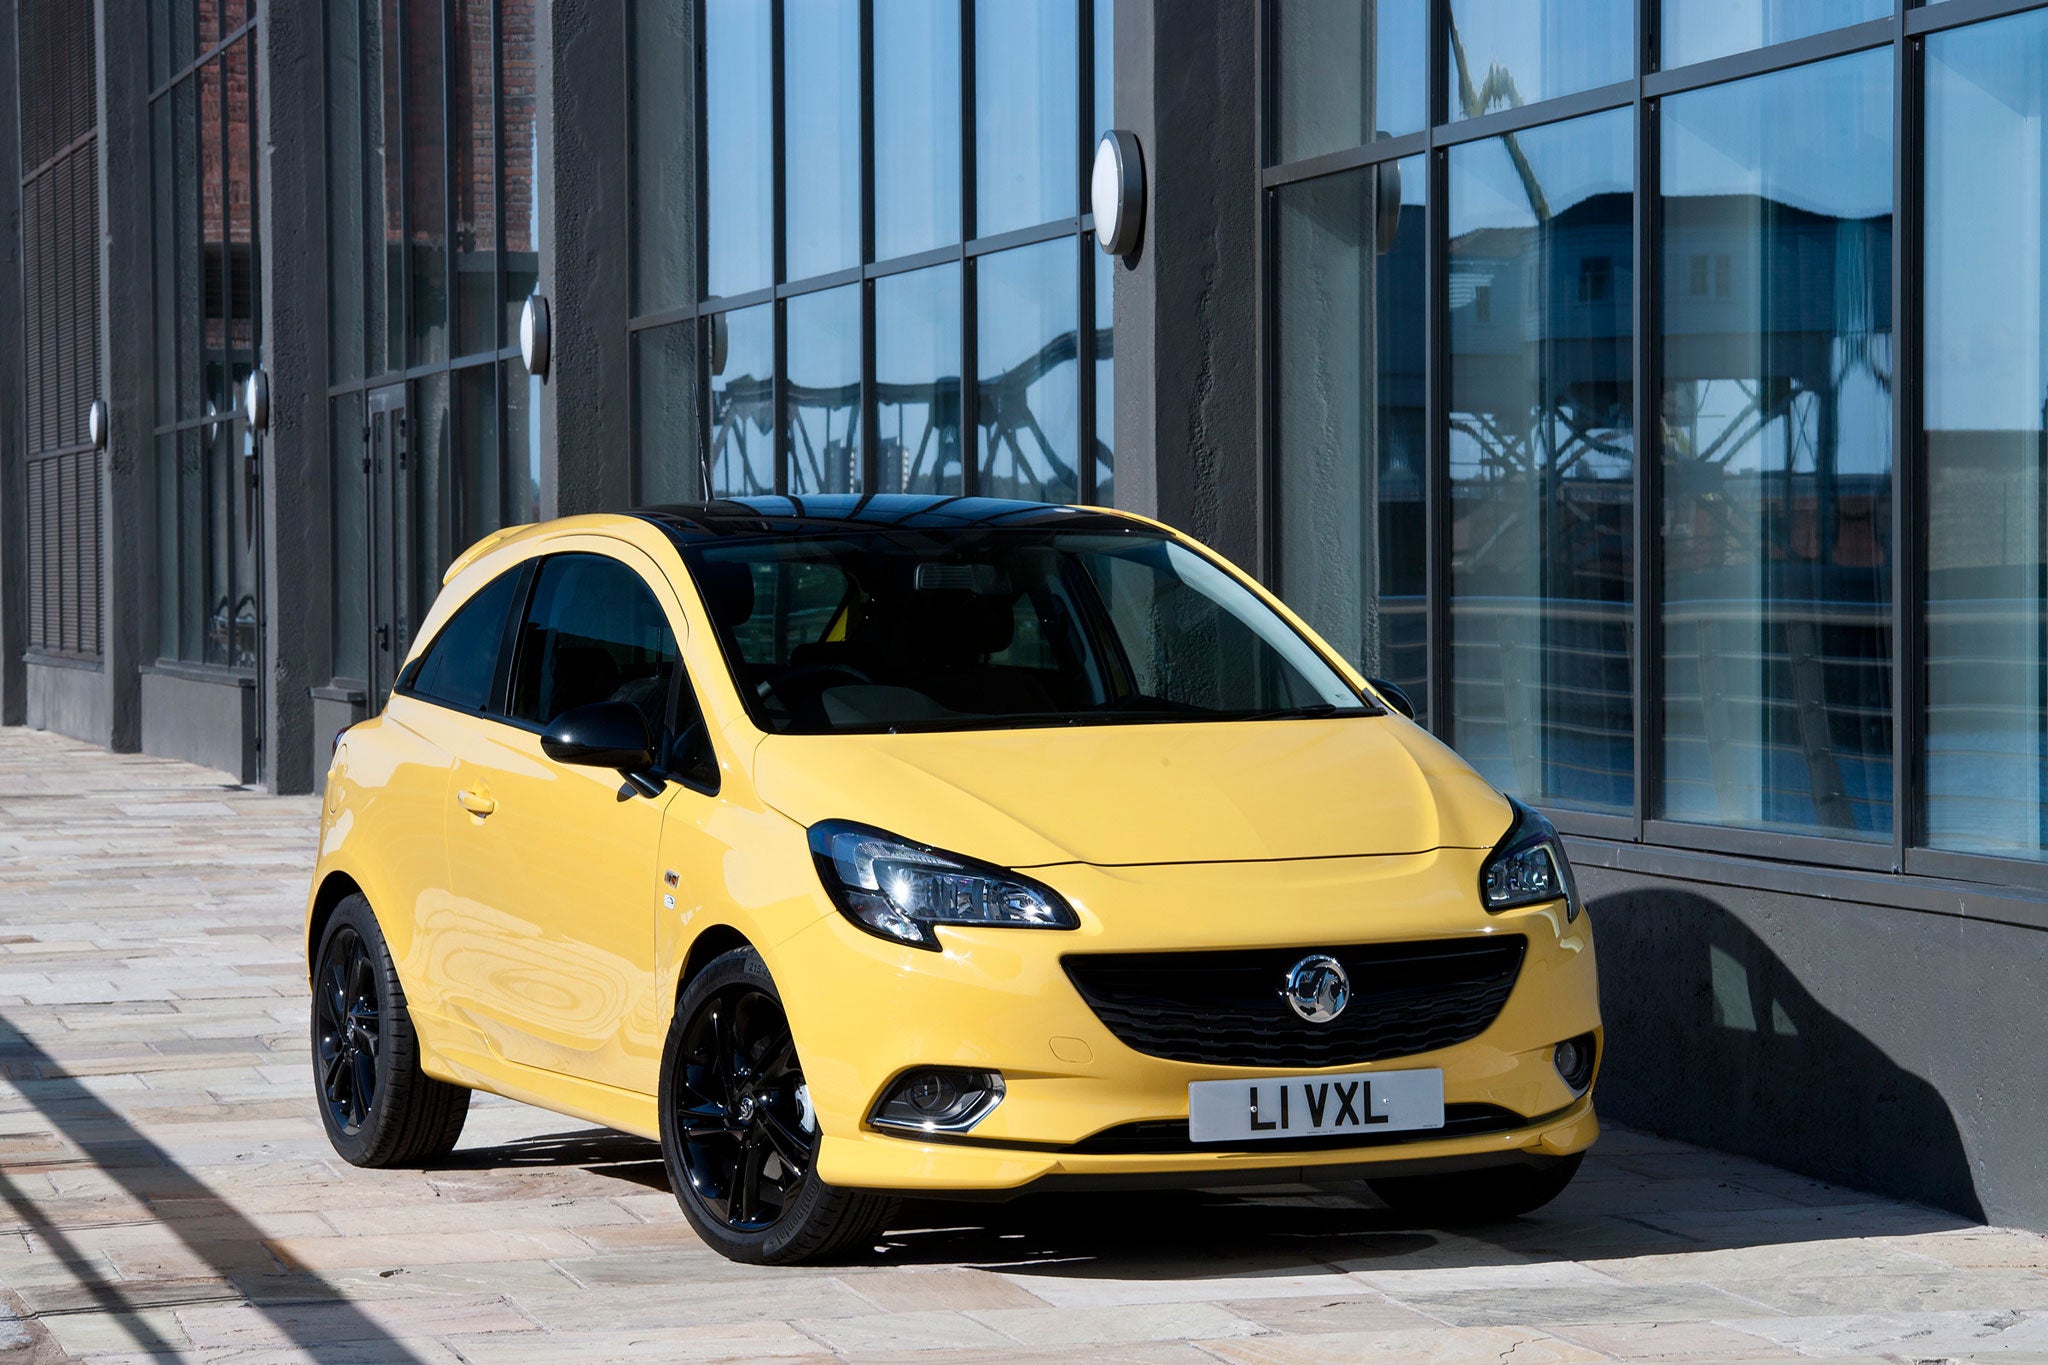 The new Corsa is comfortable, well equipped and keenly priced